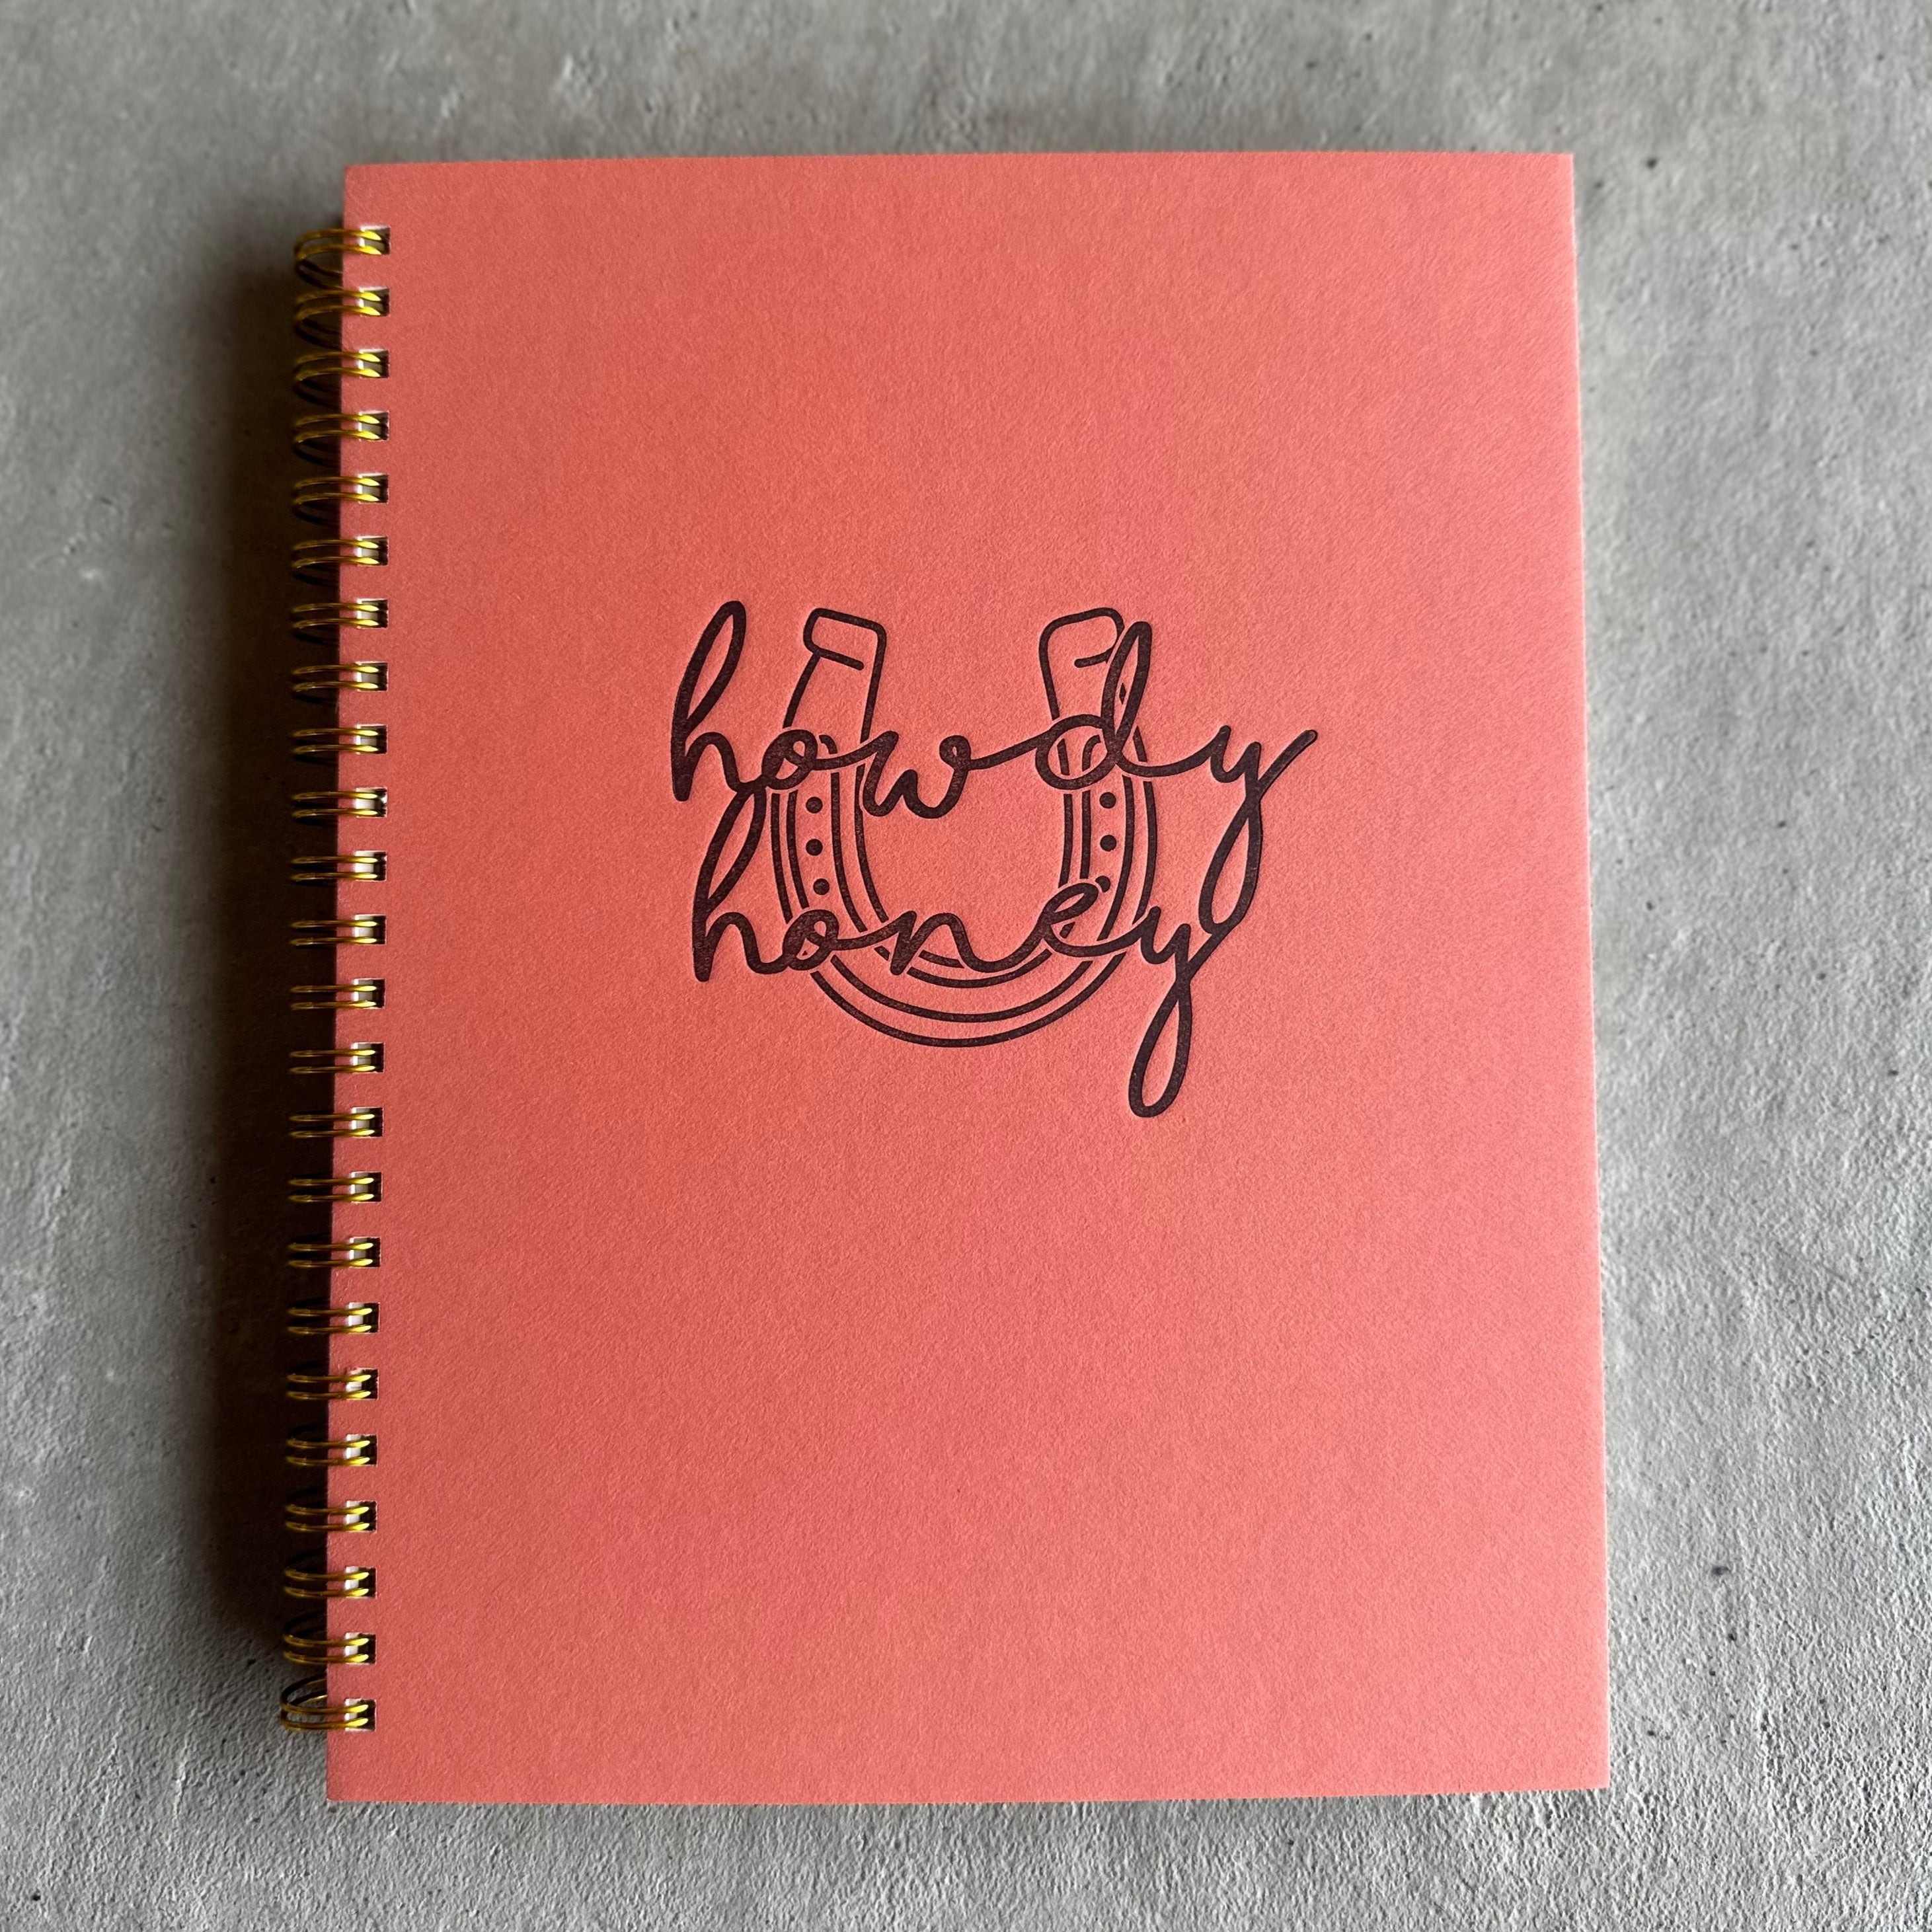 Pink wire-bound notebook with debossed text "Howdy Honey" with a horseshoe behind text 